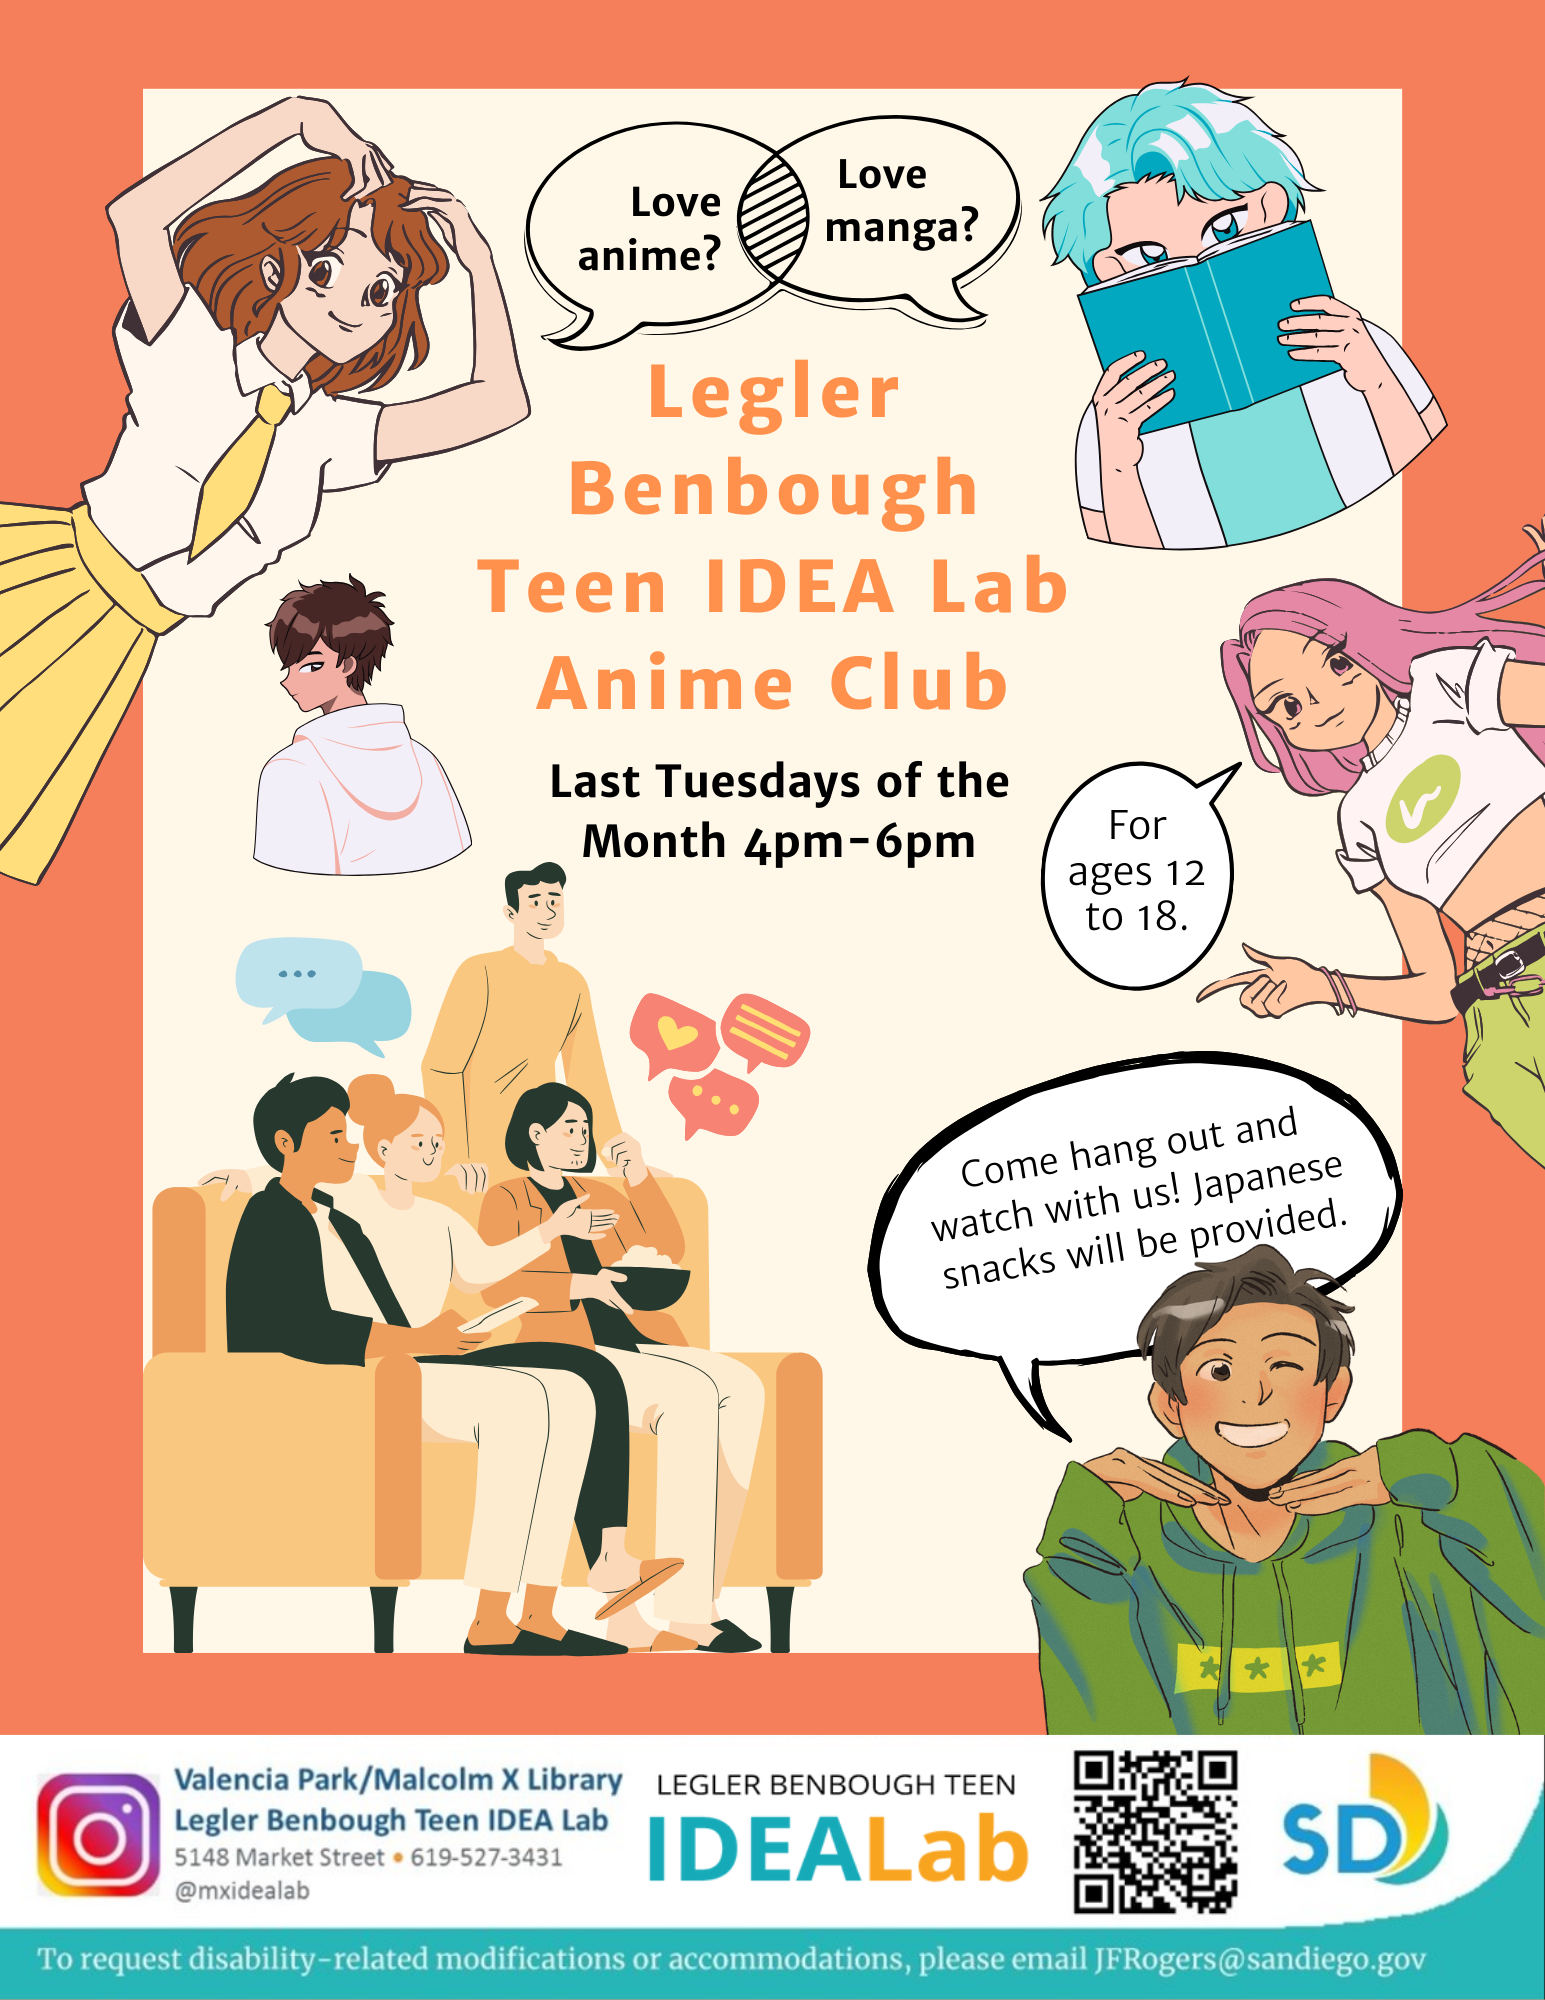 Anime Club on the last Tuesdays of the month from 4pm to 6pm.